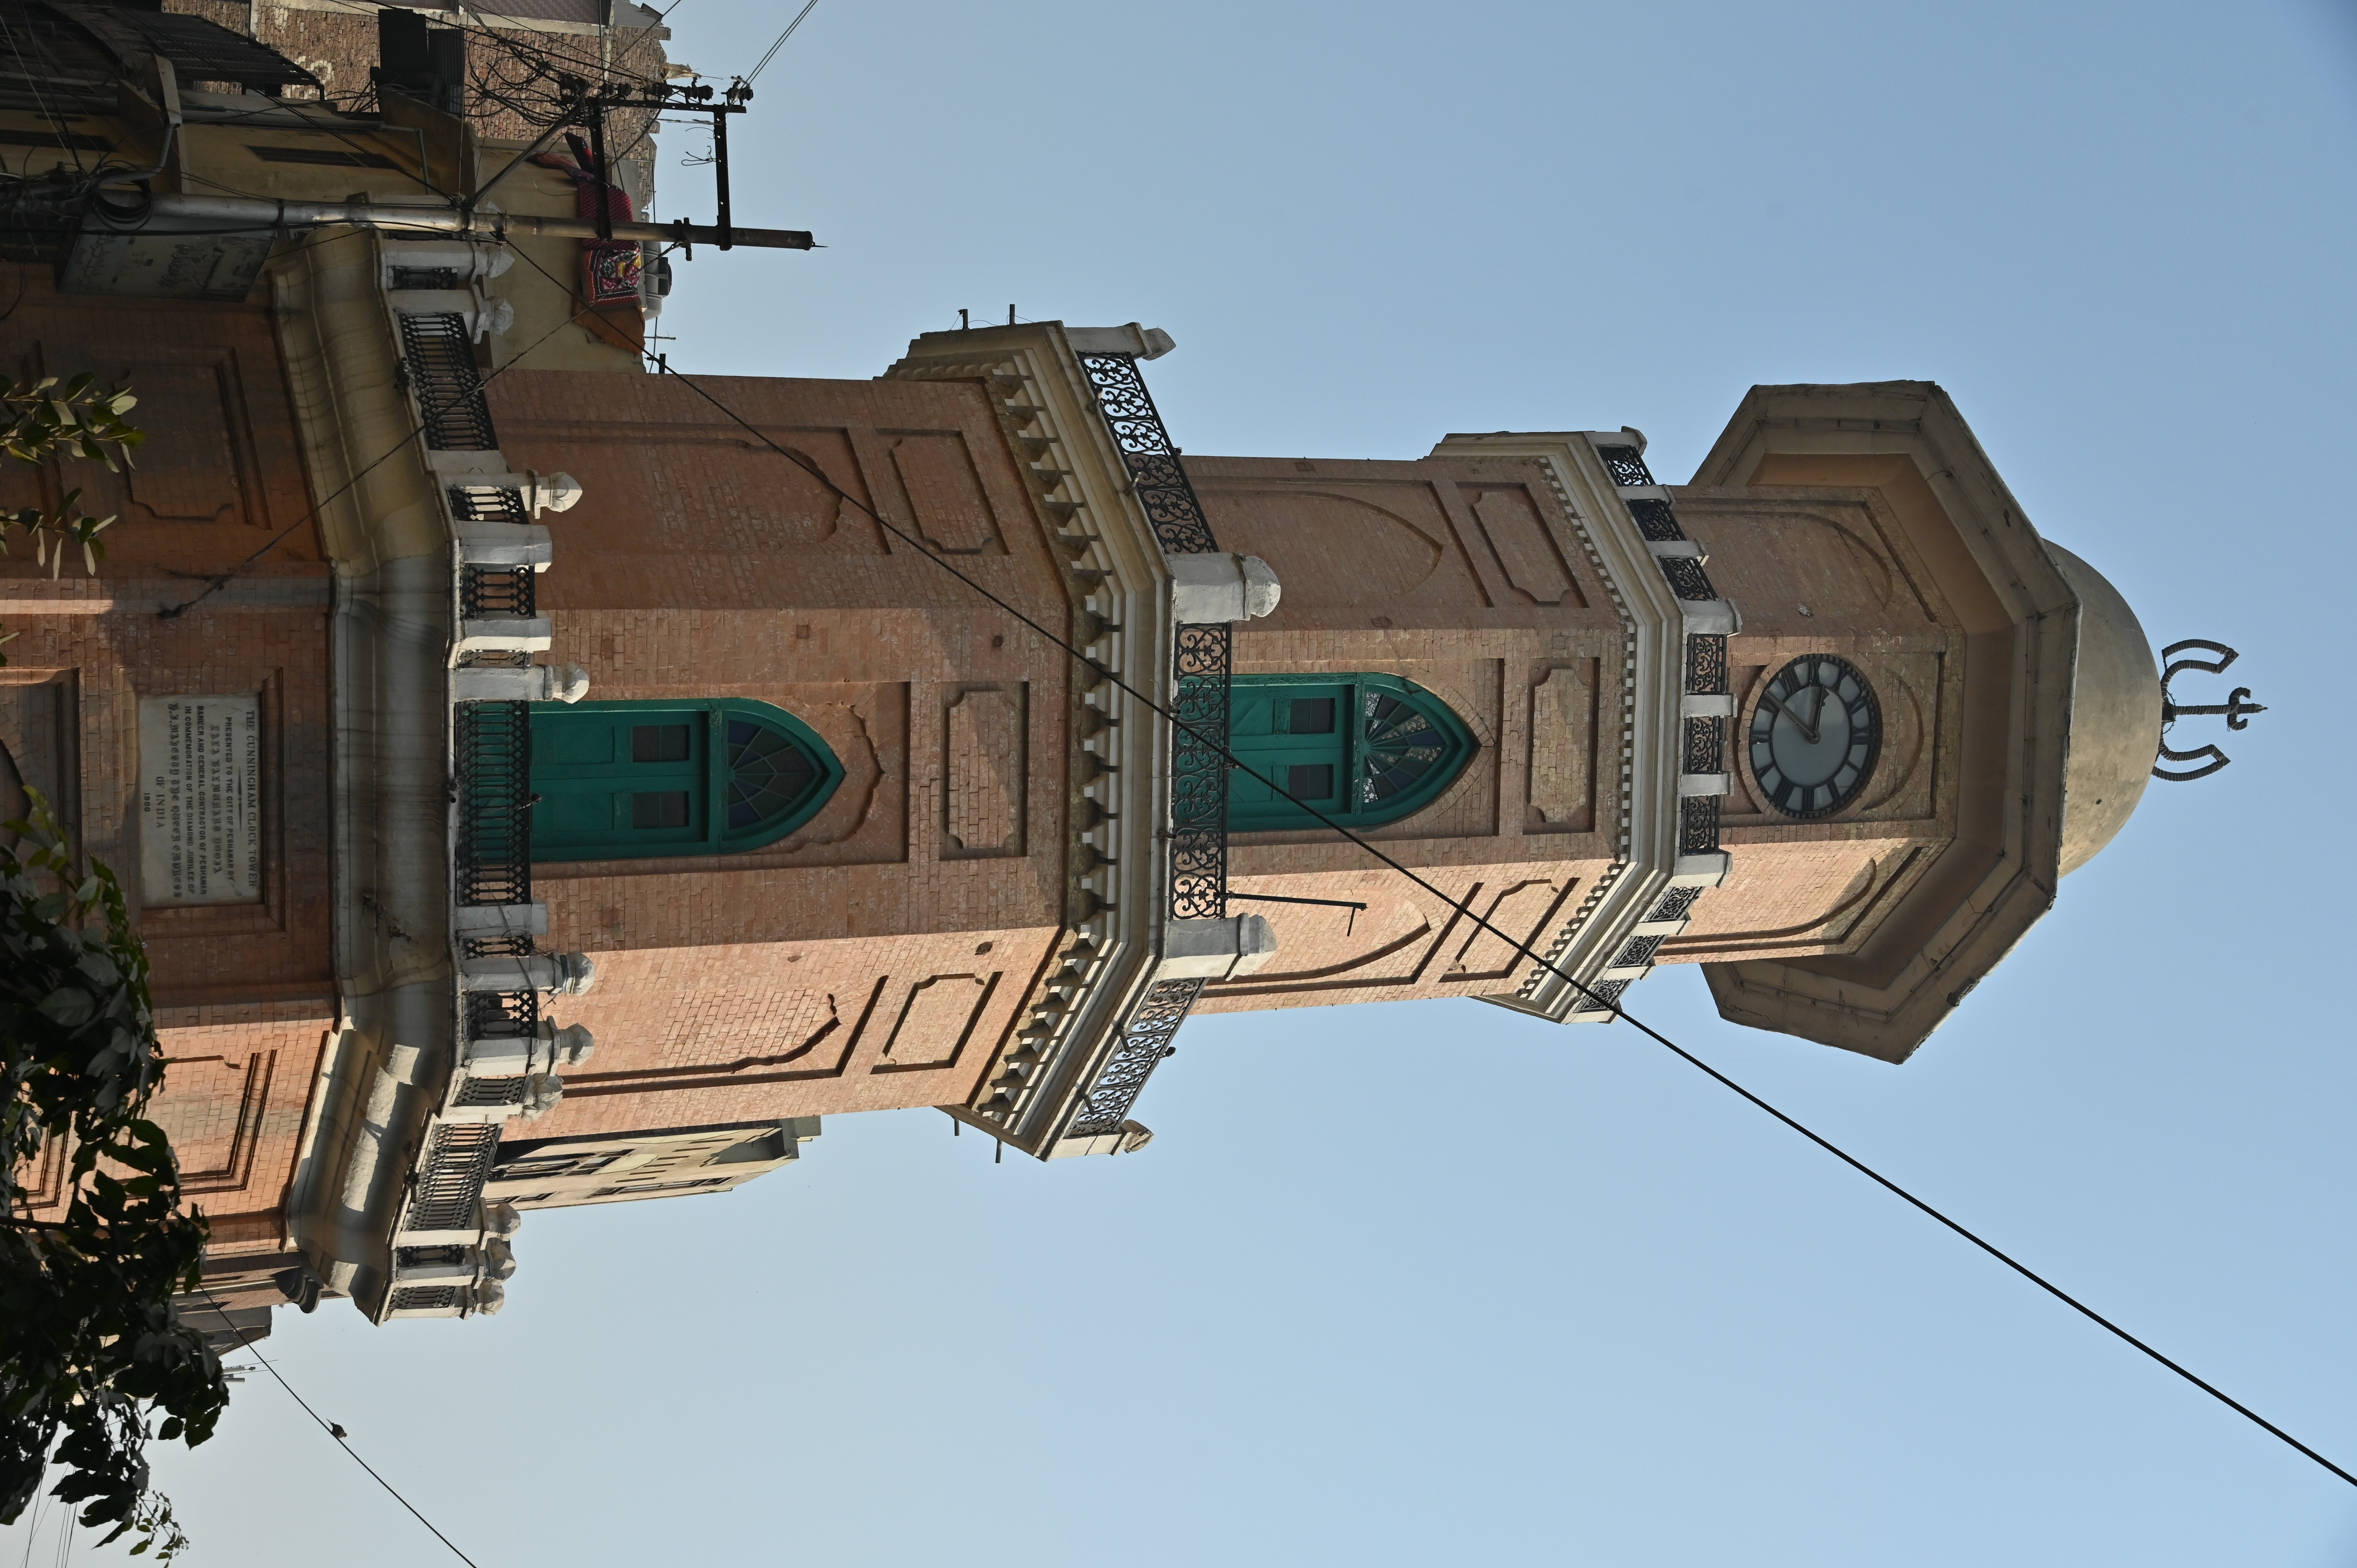 The Cunningham Clock Tower built in 1900, presented to the city of Peshawar